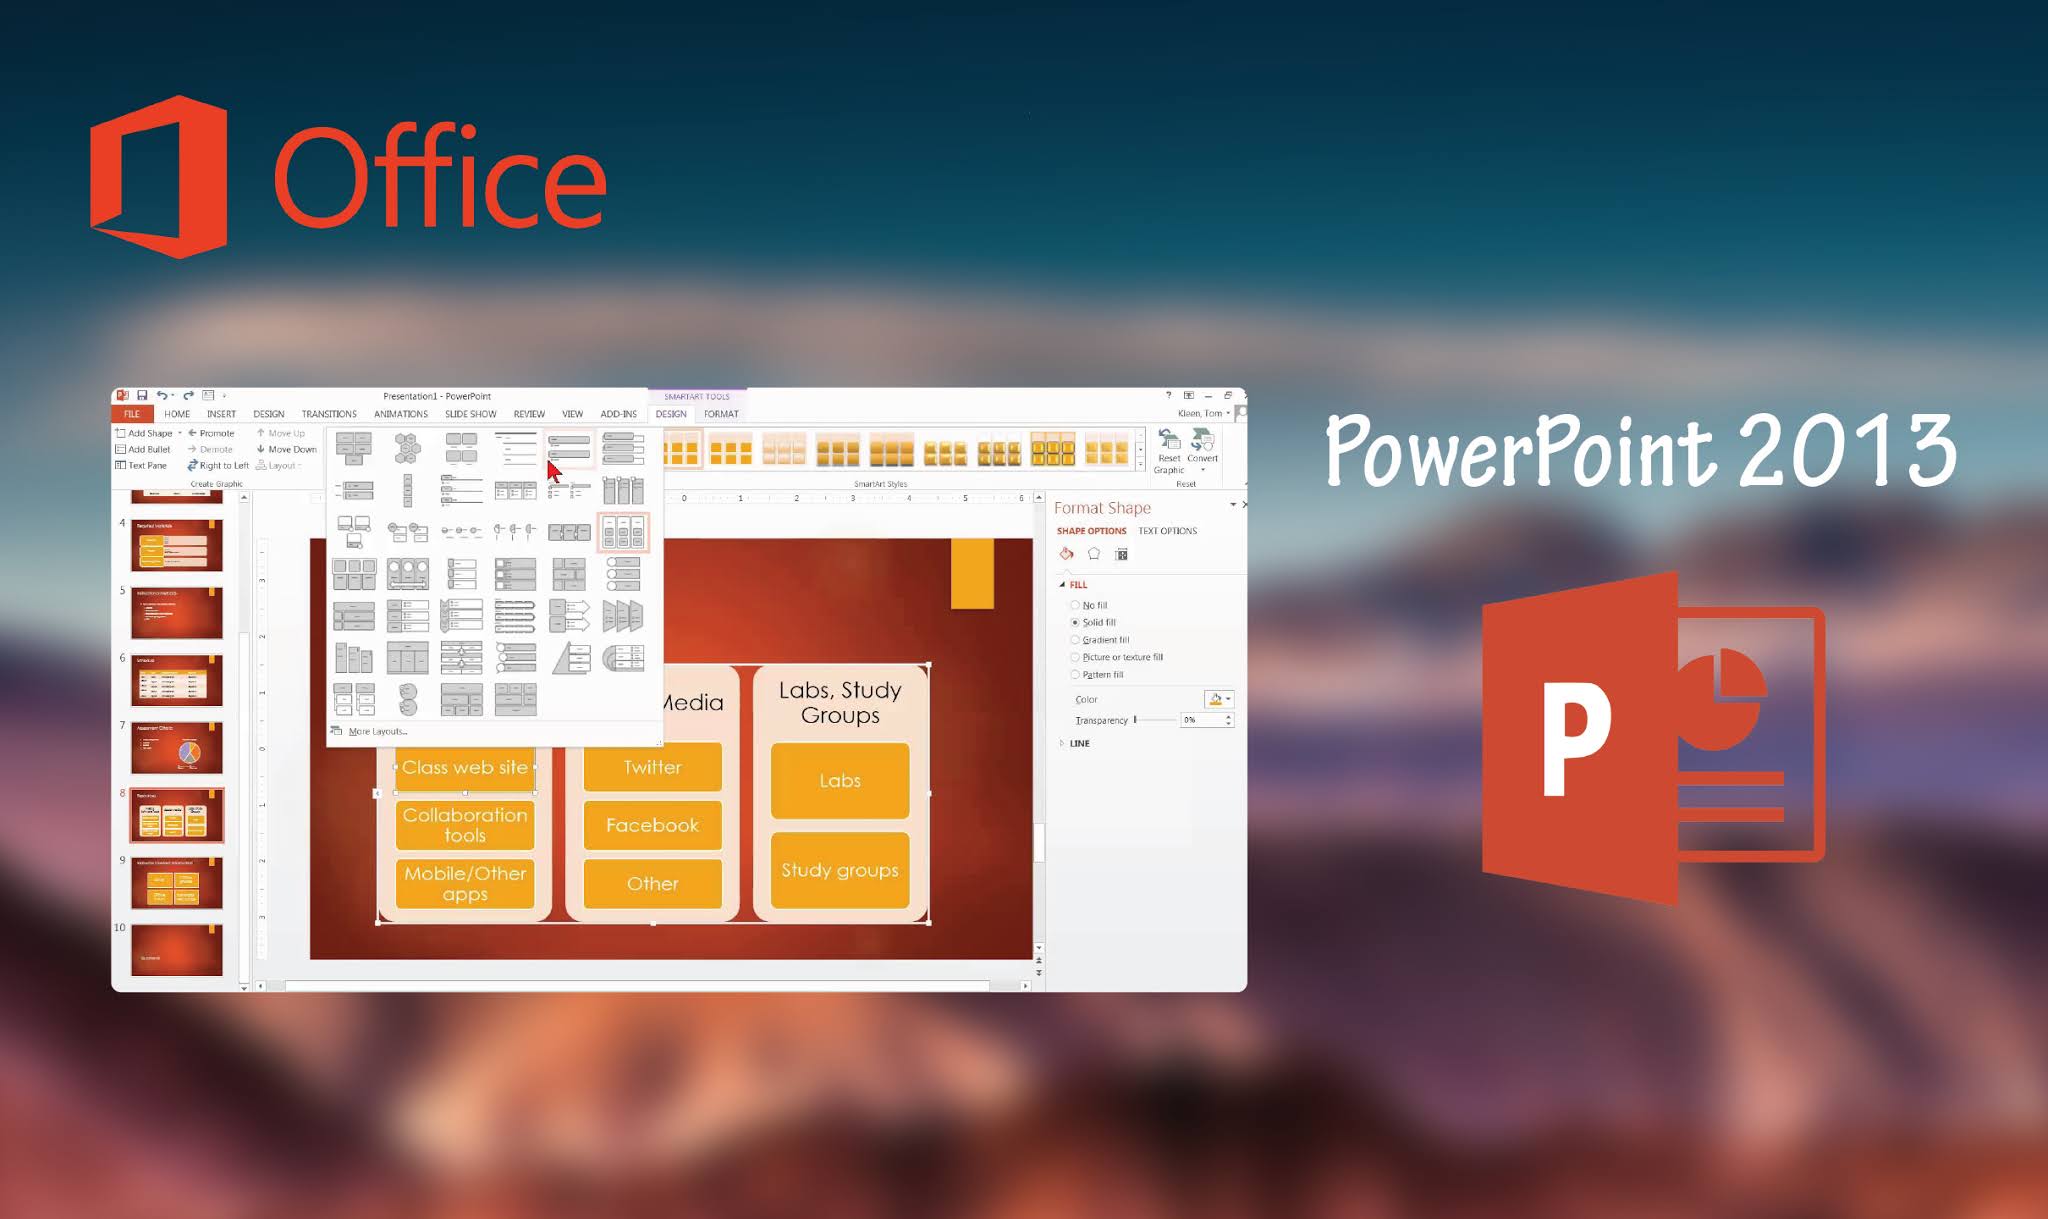 Office Power Point 2013